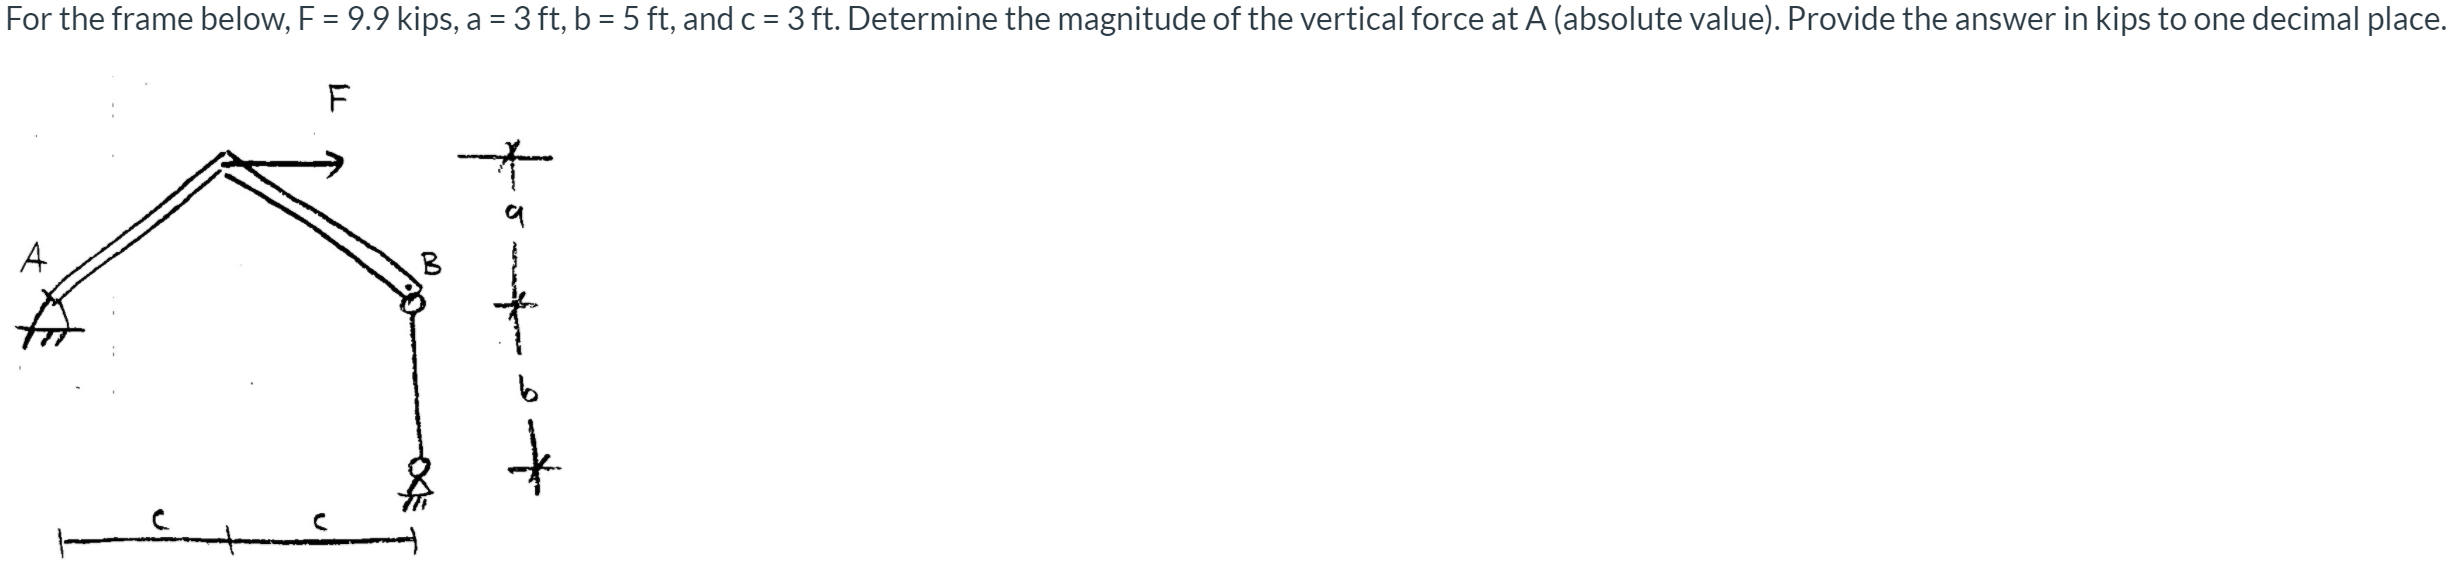 For the frame below, F = 9.9 kips, a = 3 ft, b = 5 ft, and c = 3 ft. Determine the magnitude of the vertical force at A (absolute value). Provide the answer in kips to one decimal place.
F
A
to
